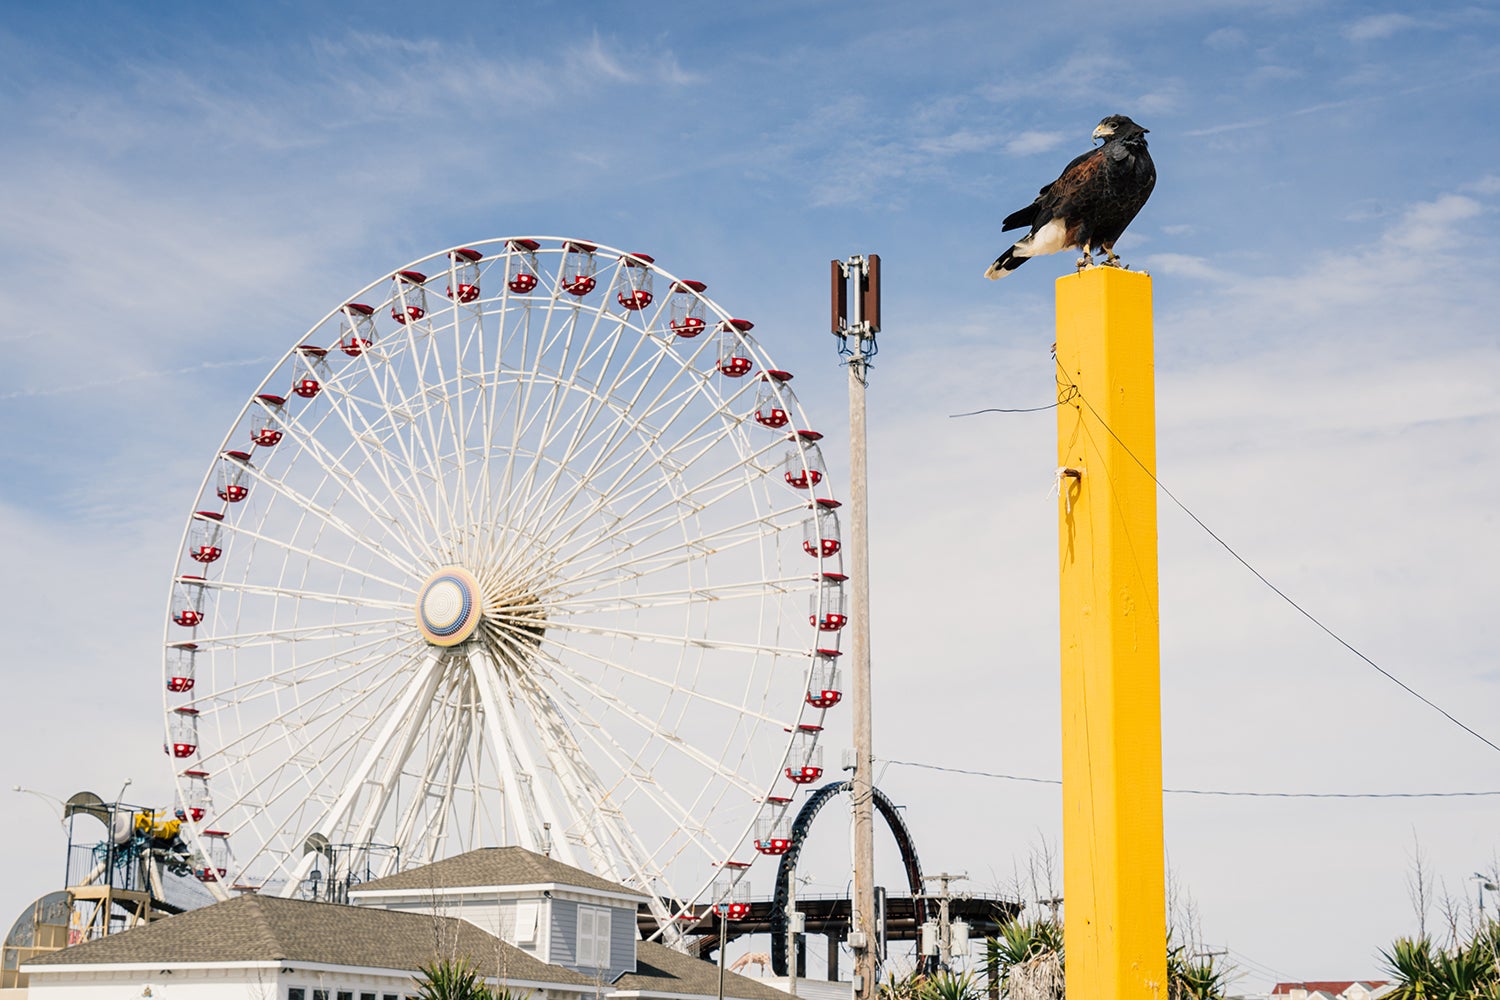 hawk sits atop yellow post with ferris wheel in backgtound